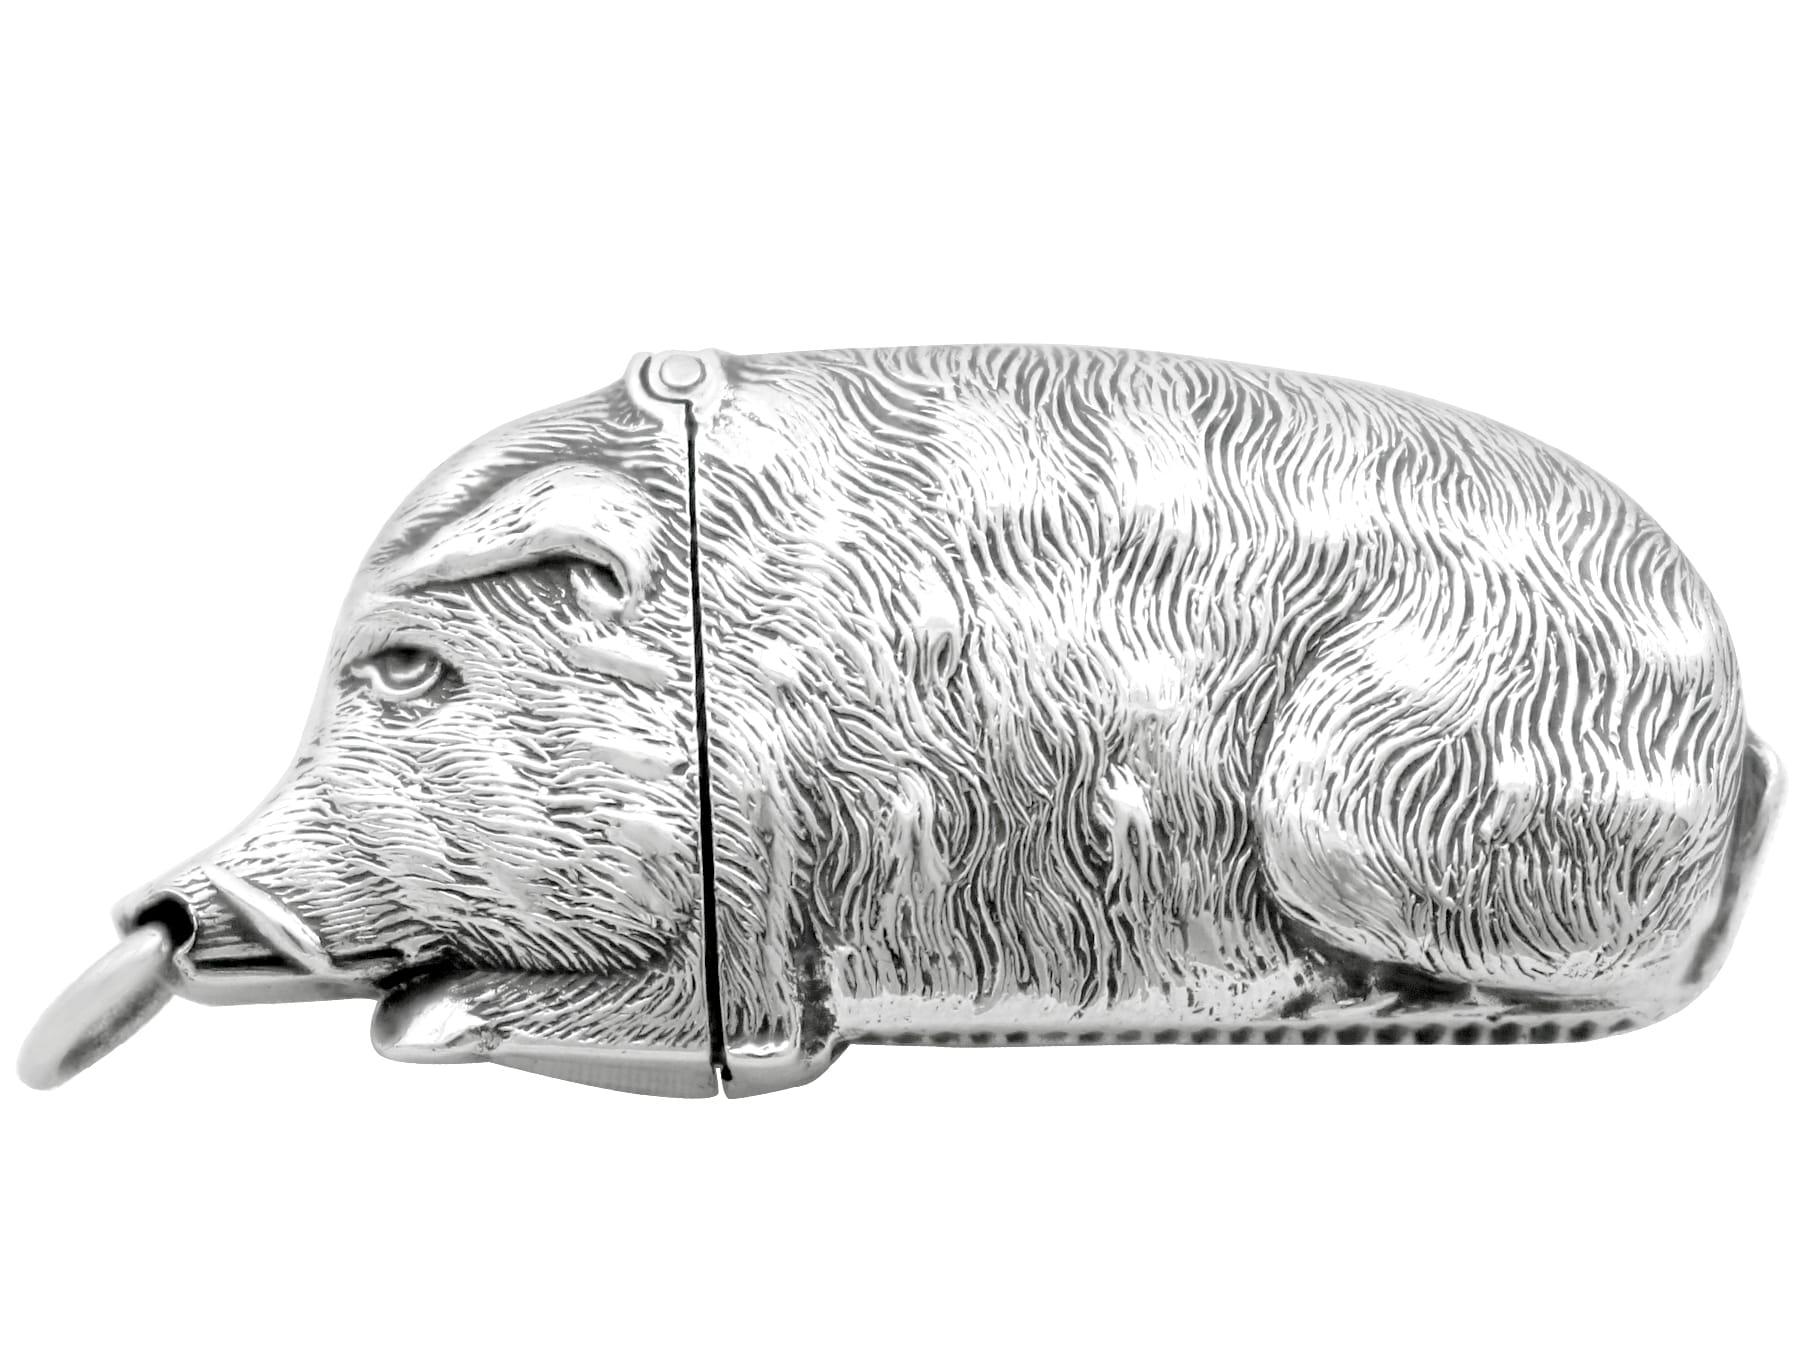 An exceptional, fine and impressive, rare antique Victorian English sterling silver vesta case modelled in the form of a boar; an addition to our ornamental silverware collection

This exceptional antique Victorian sterling silver vesta case has